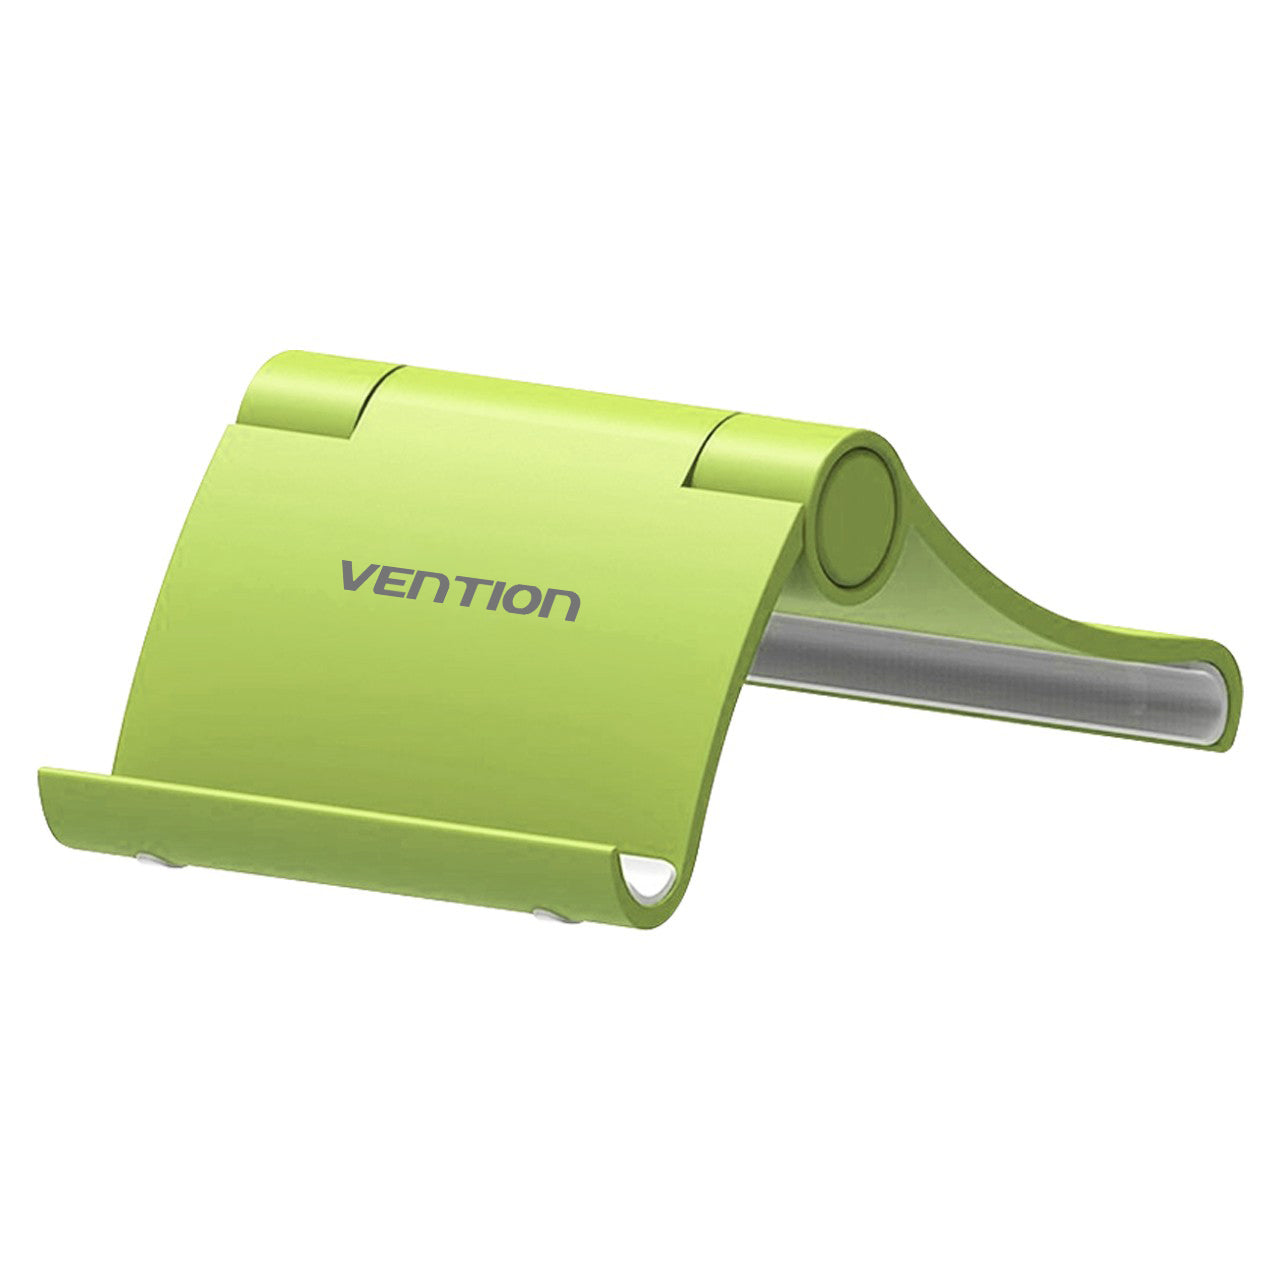 Vention Phone Holder Foldable Desk Stand for Mobile Smartphone Tablet (KCA) (Different Colors Available)